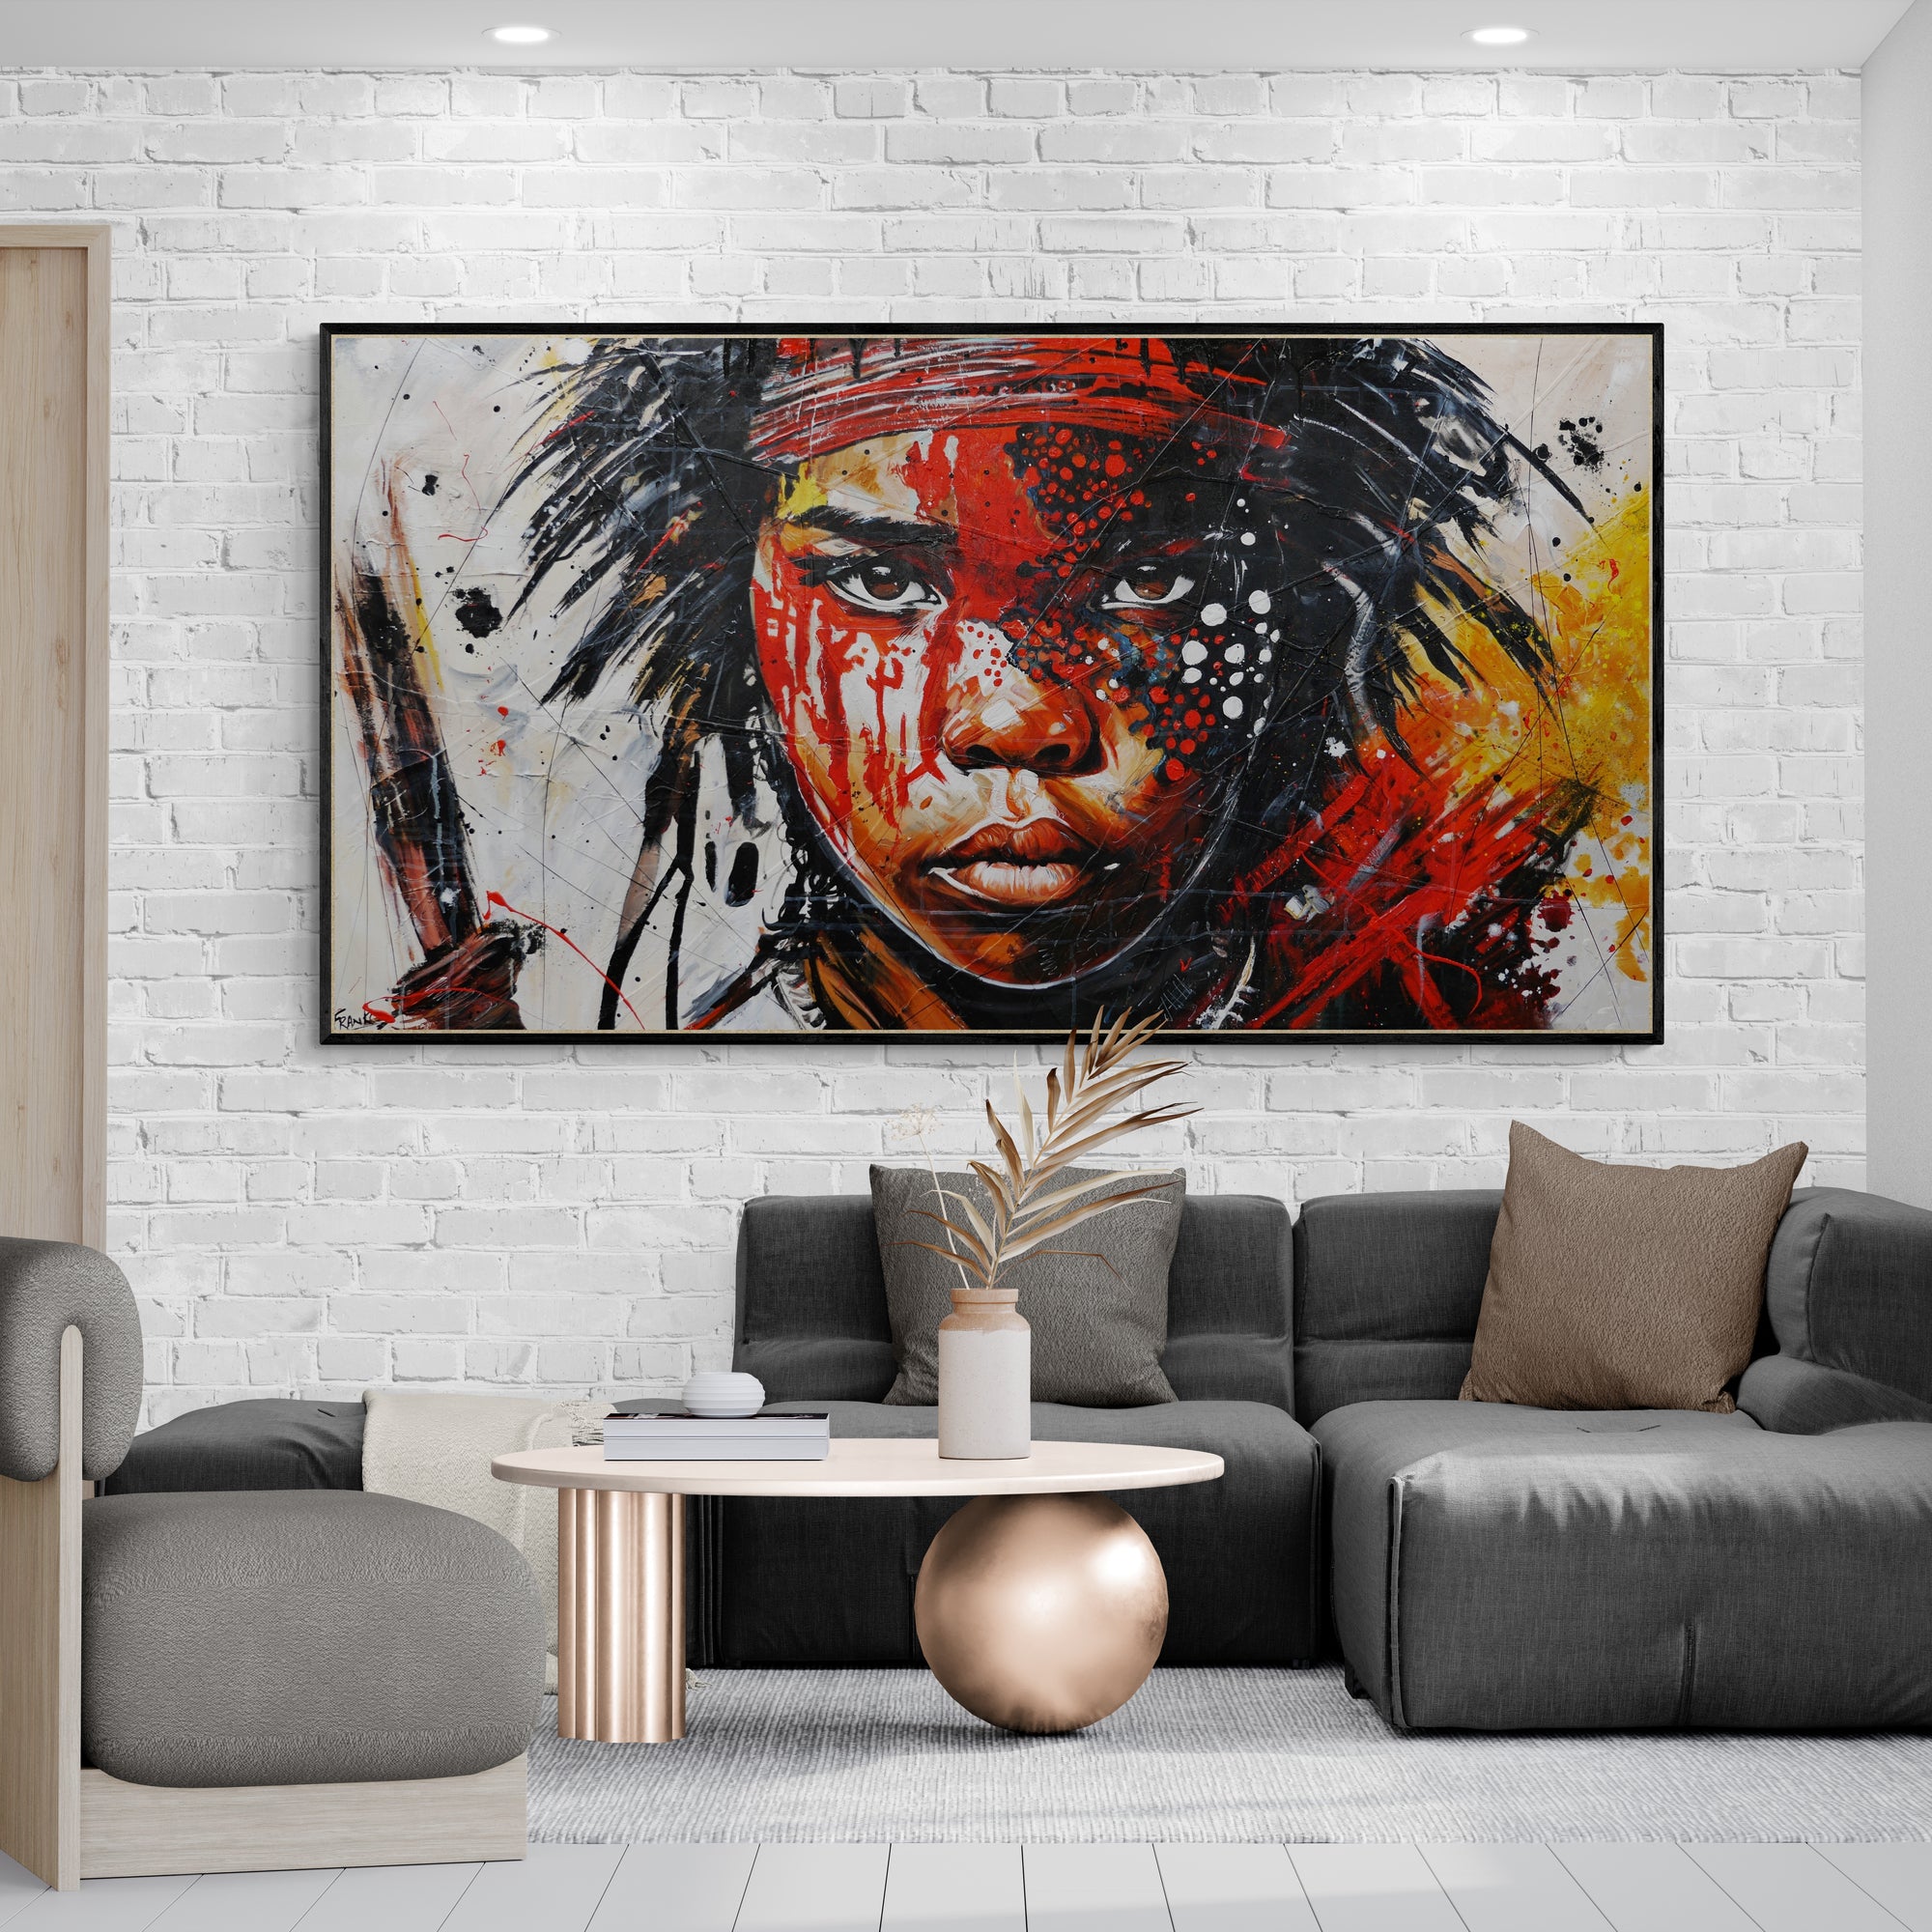 Tribal 190cm x 100cm Brave and Beautiful Abstract Framed Textured Painting